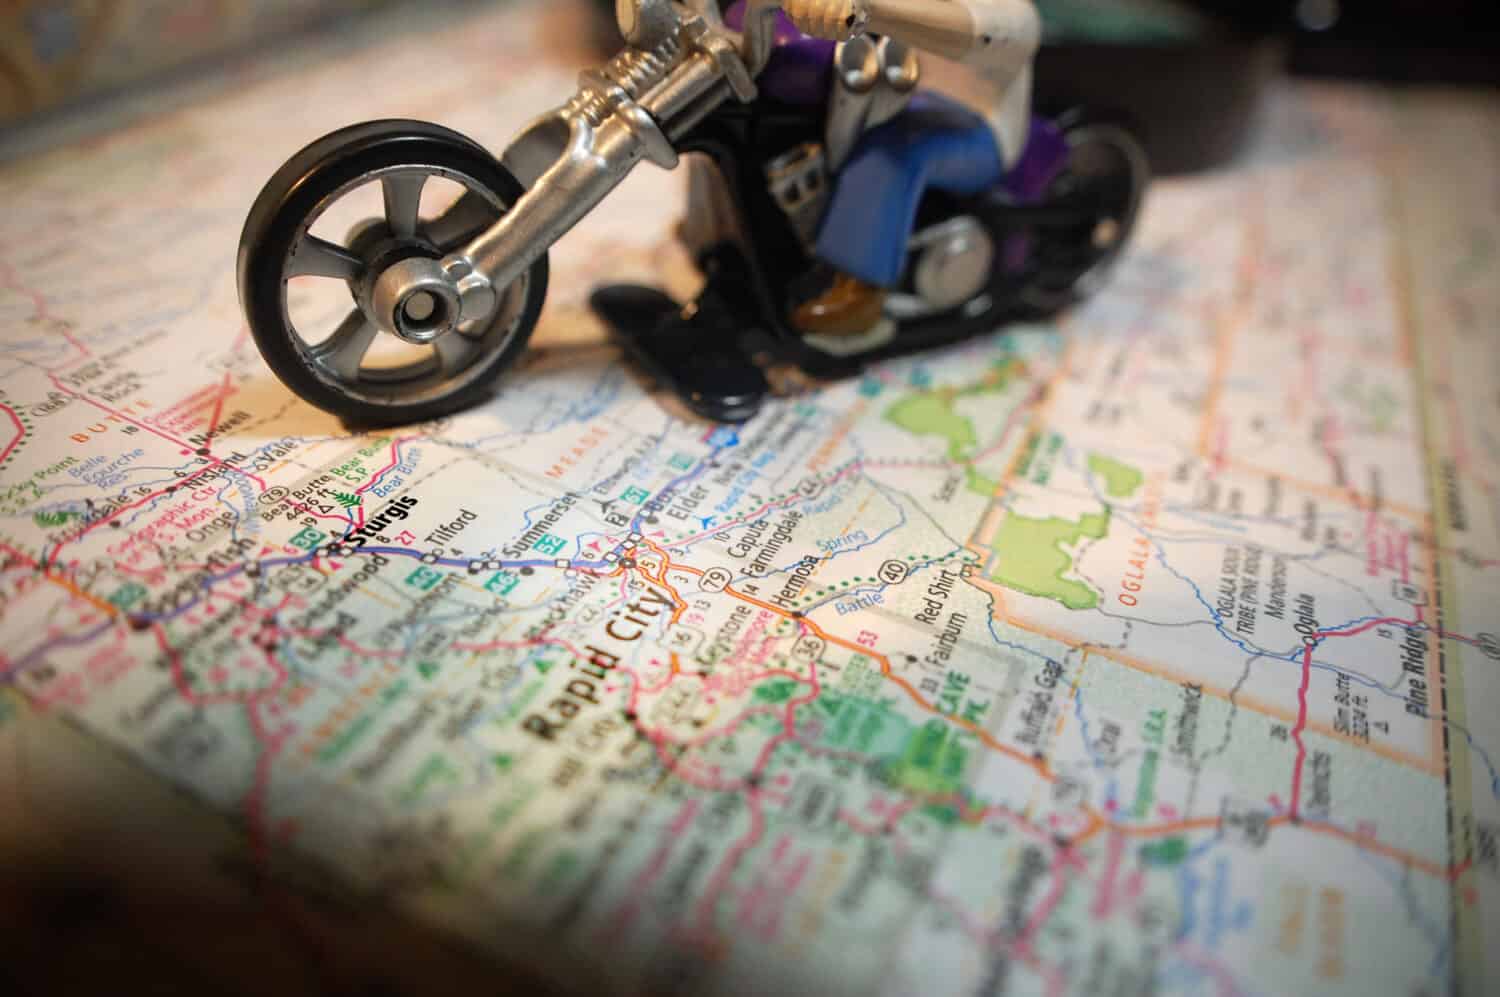 A toy motorcycle pictured with a map of Sturgis, South Dakota.